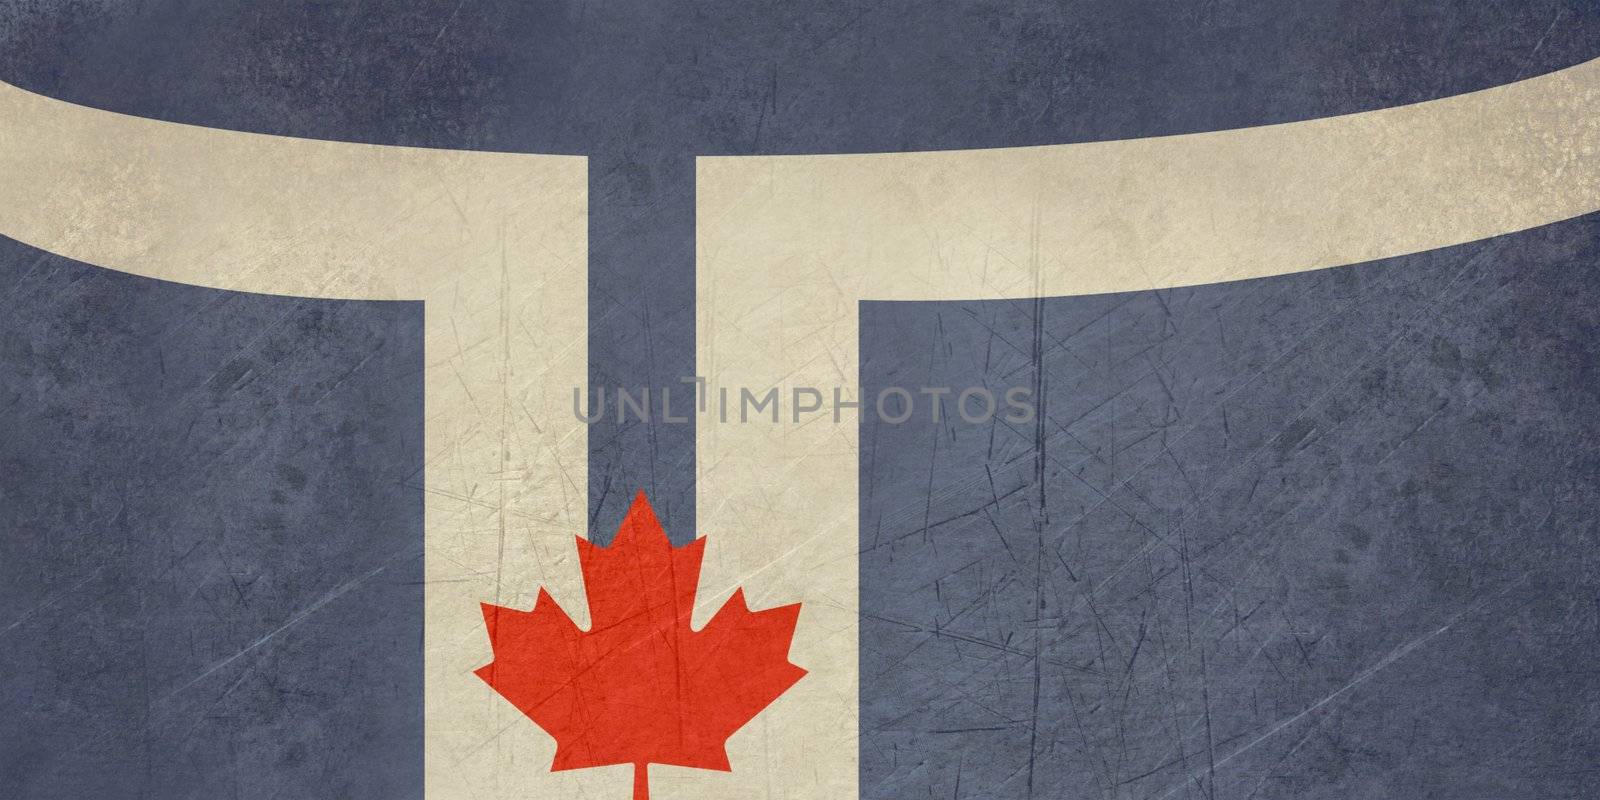 Grunge Toronto city flag is official colors, Canada.